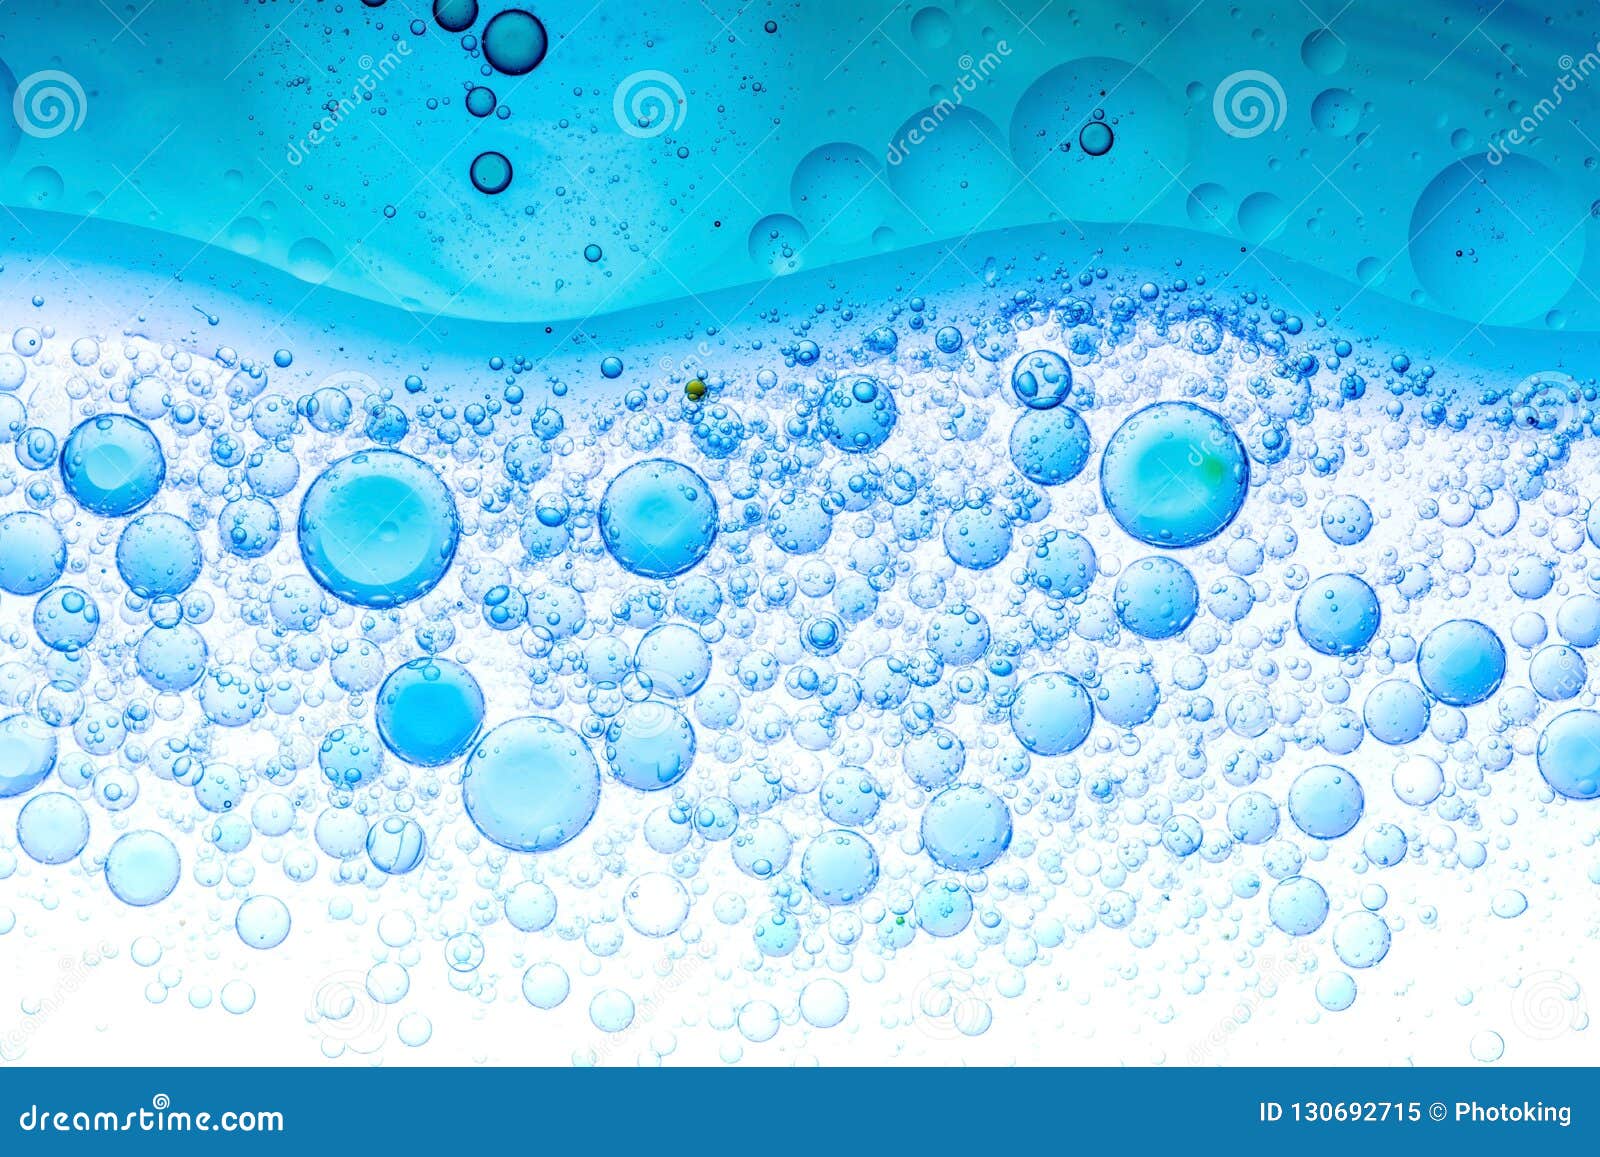 water and oil bubble background